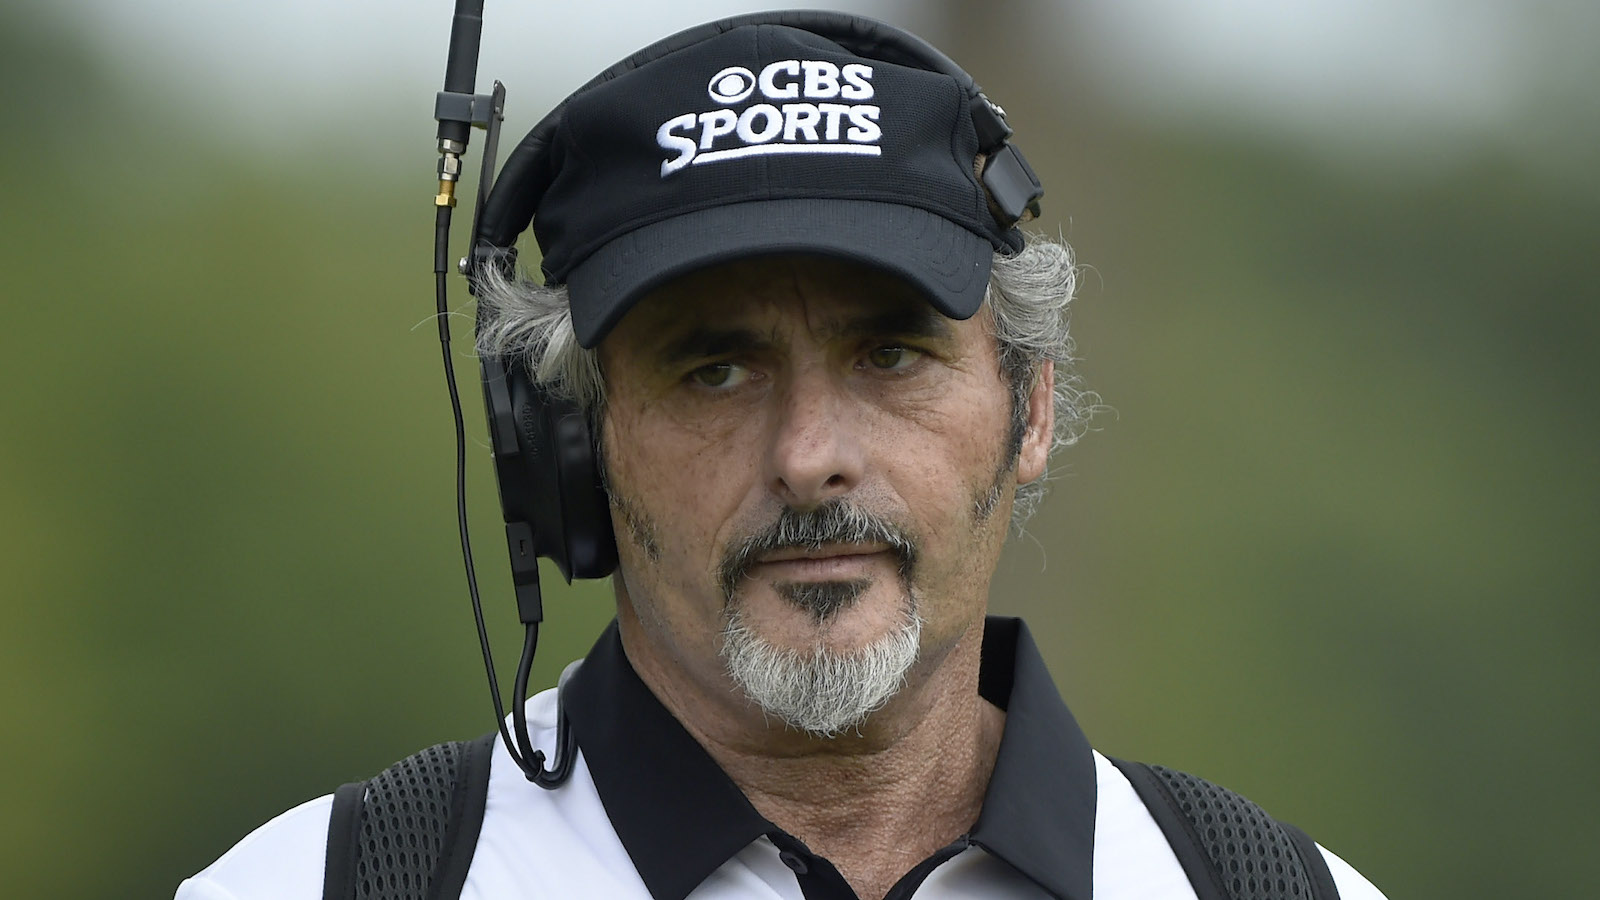 David Feherty gives 1-word explanation for why he joined LIV Golf